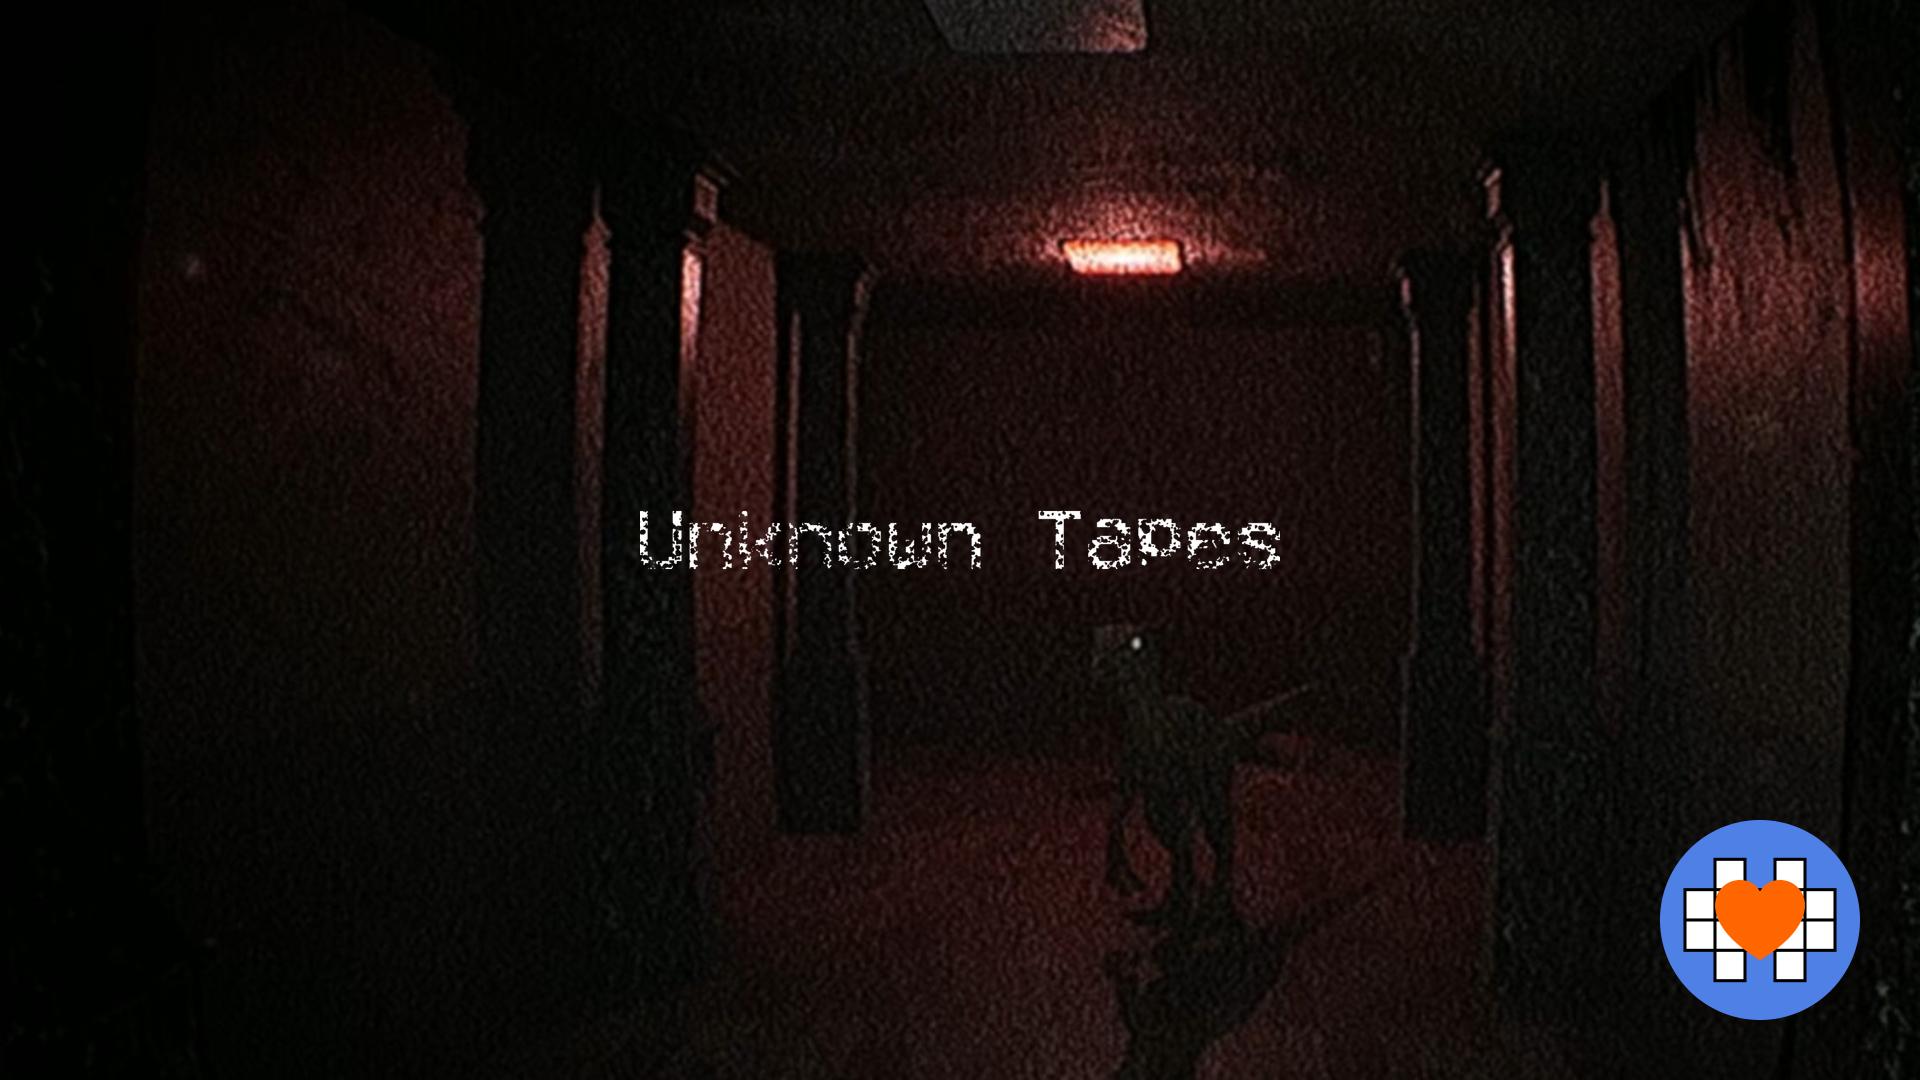 Unknown Tapes – A dinosaur-based analog horror video game